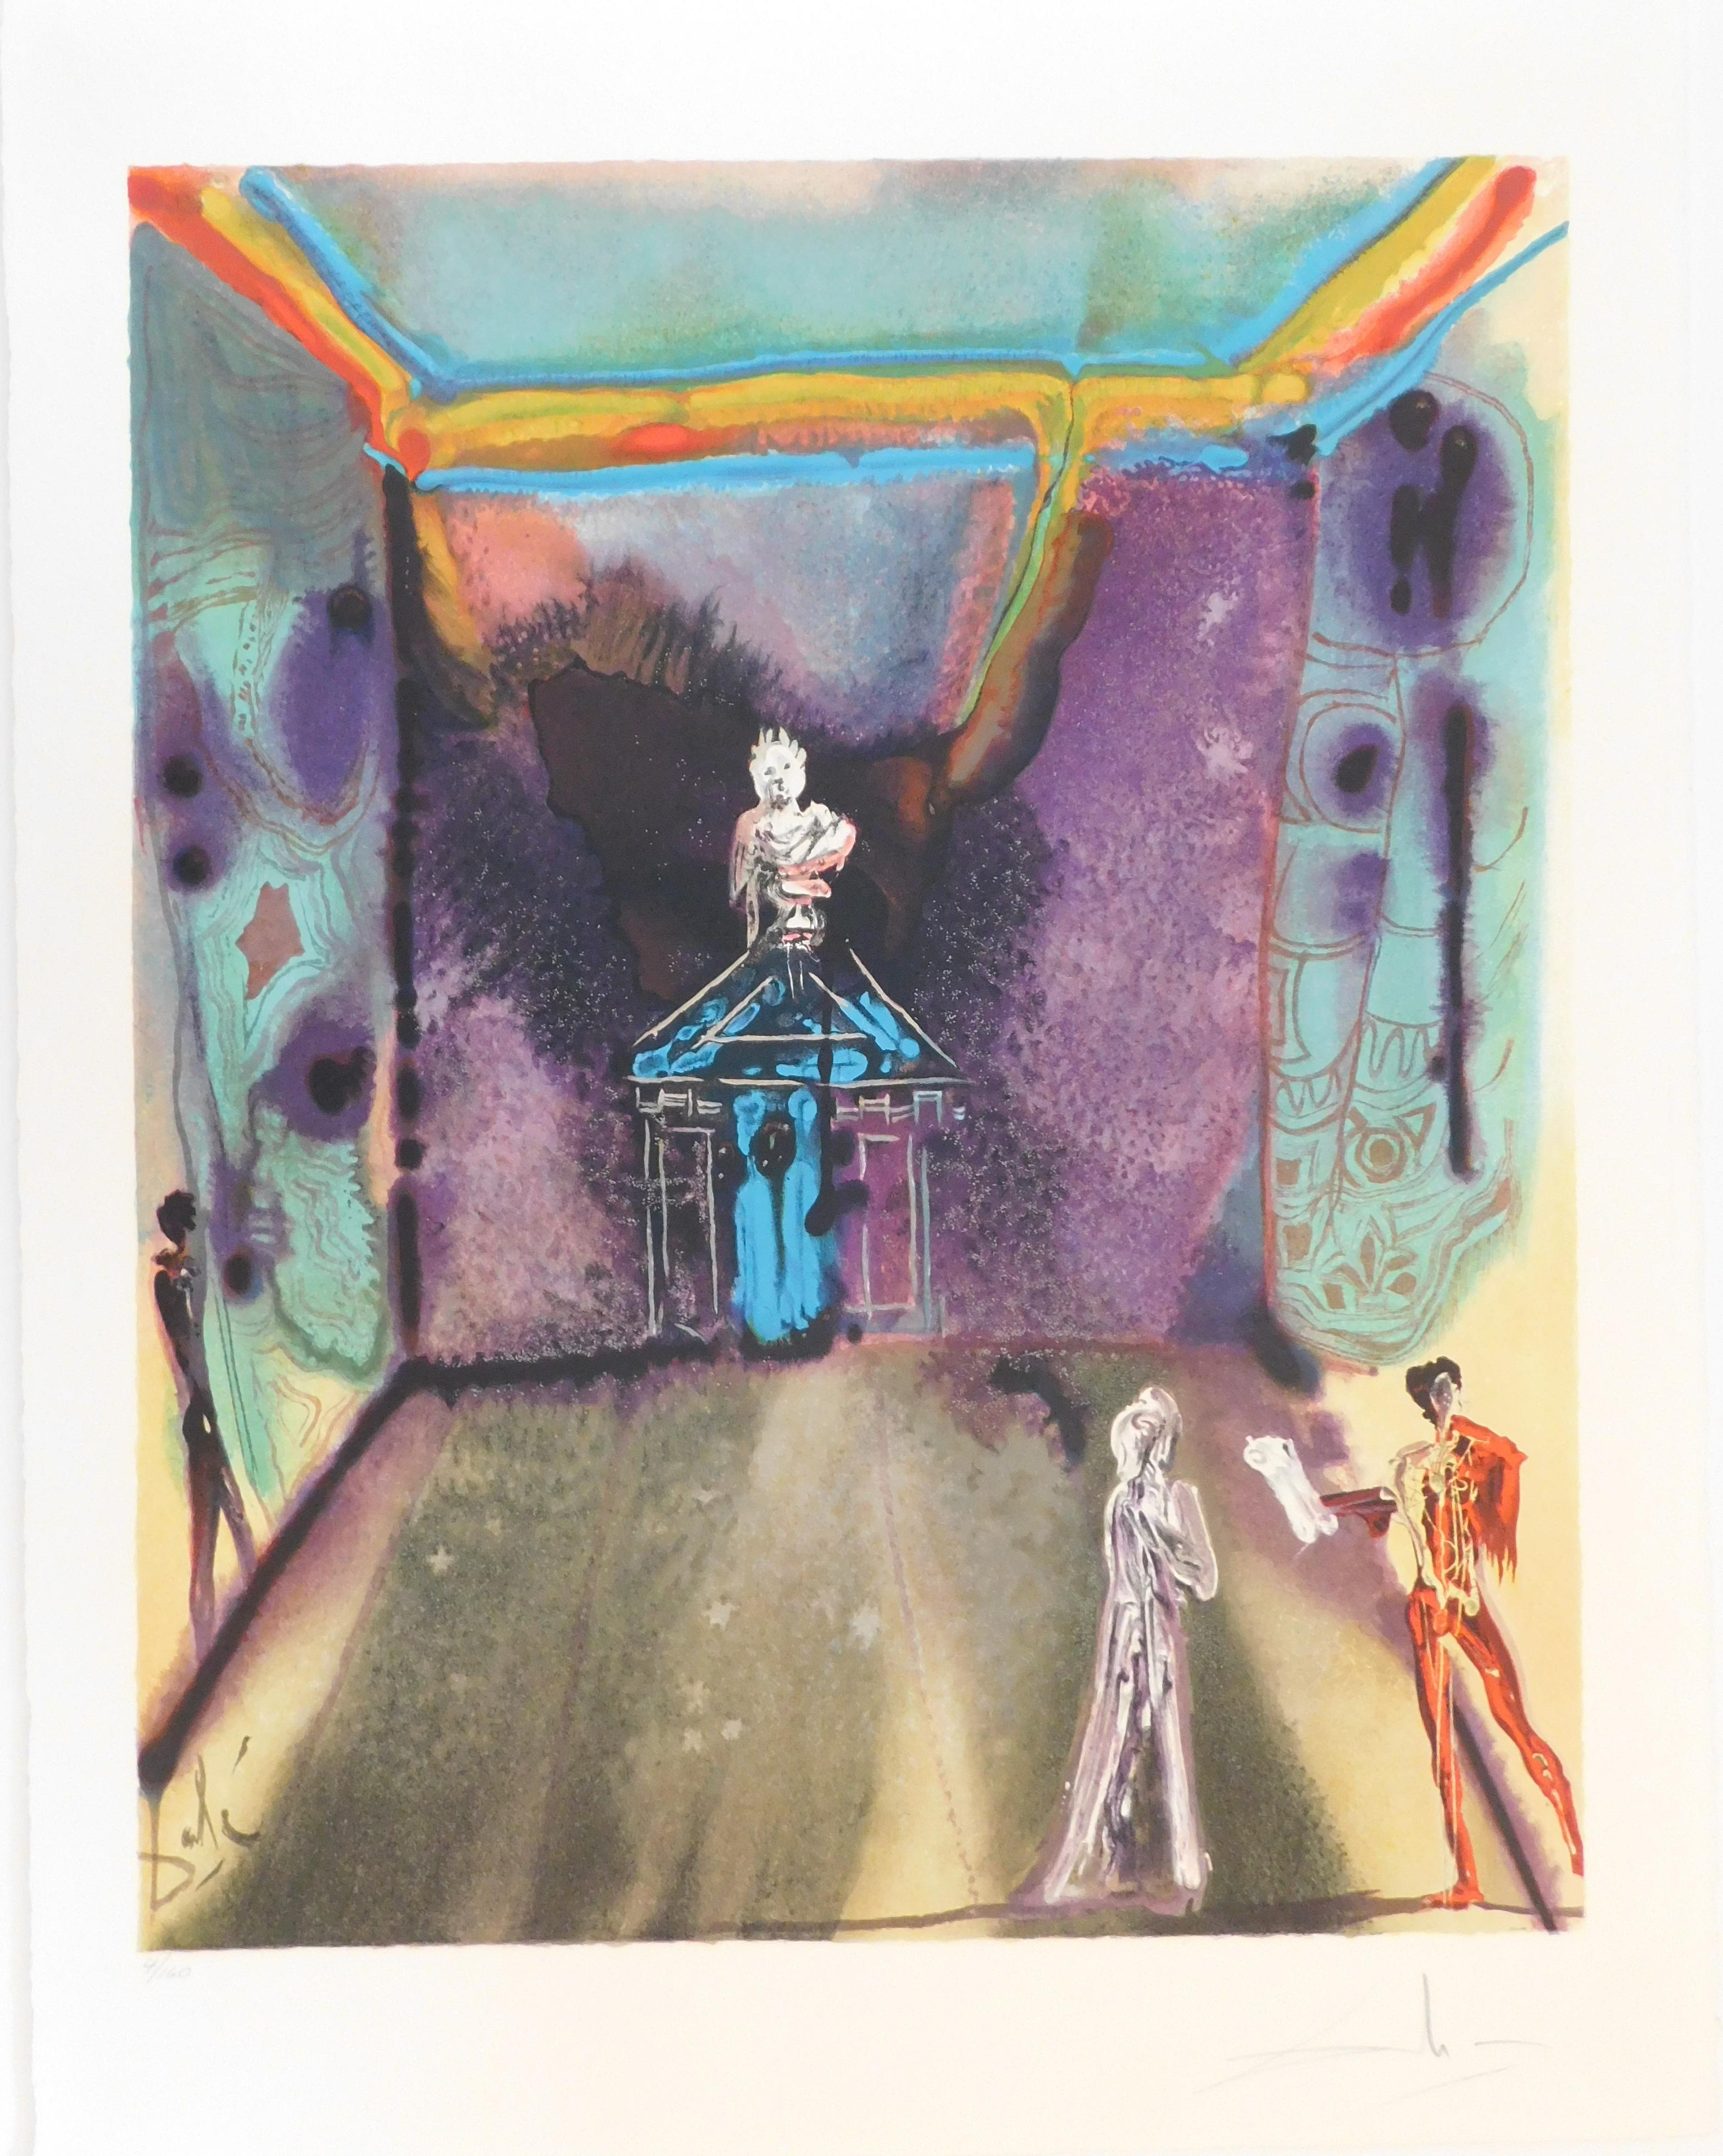 This is an original color lithograph by Salvador Dali created in 1969 and titled 